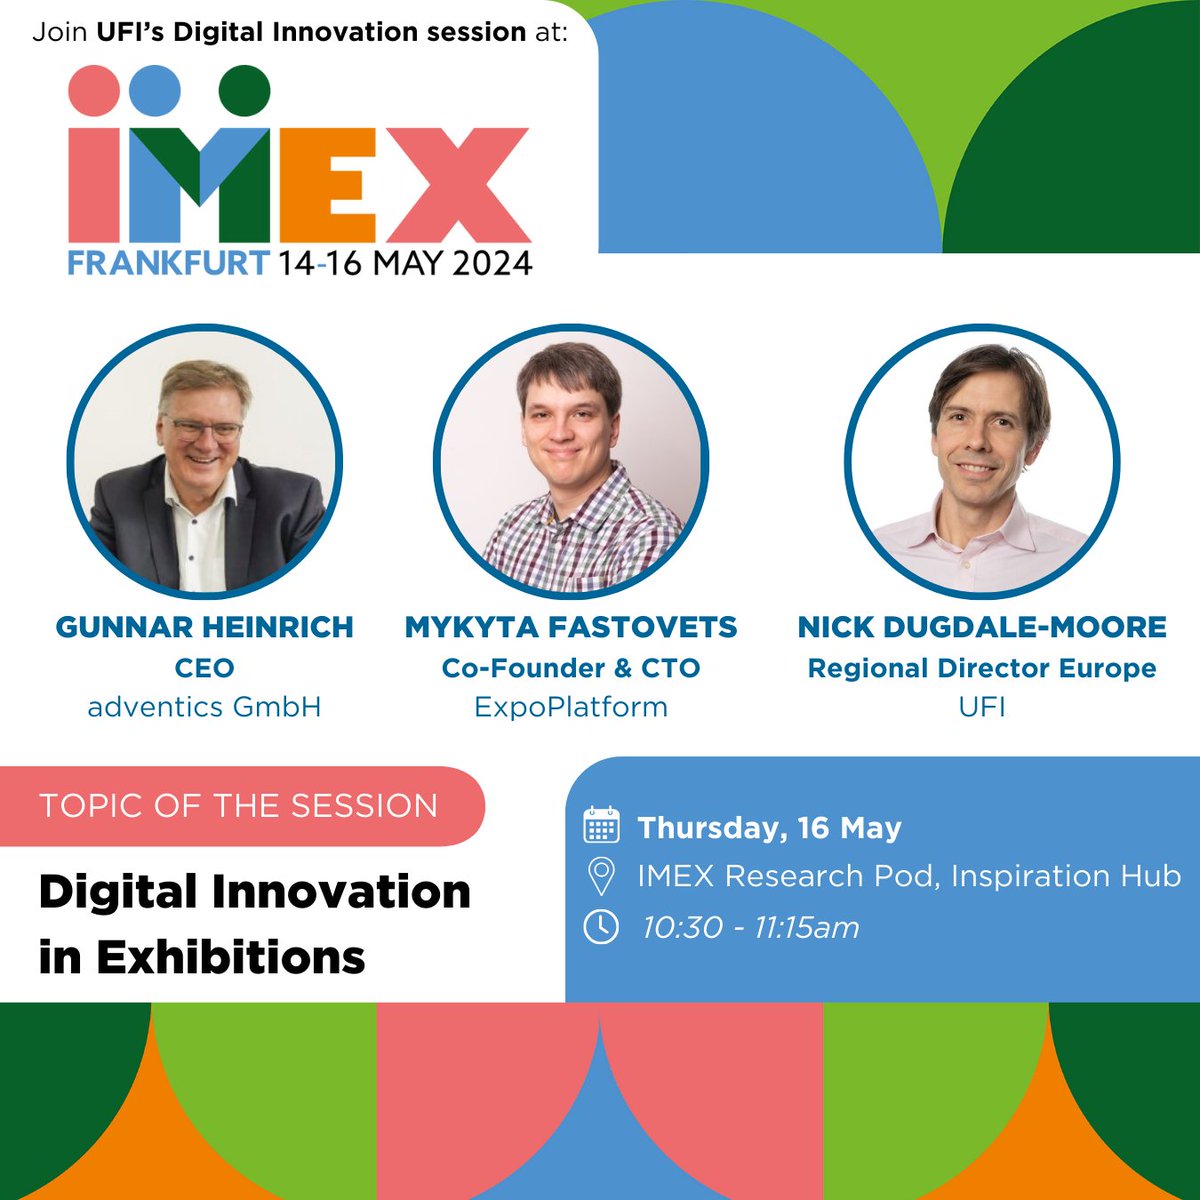 🤖🏆 Attending @IMEX_Group? Join UFI's Digital Innovation Working Group on 16 May for an exclusive session showcasing the four finalists for this year's award! 🔗 For more info, visit: brnw.ch/21wJJ7I #ufi #digitalinnovation #IMEX #IMEX24 #AI #eventprofs